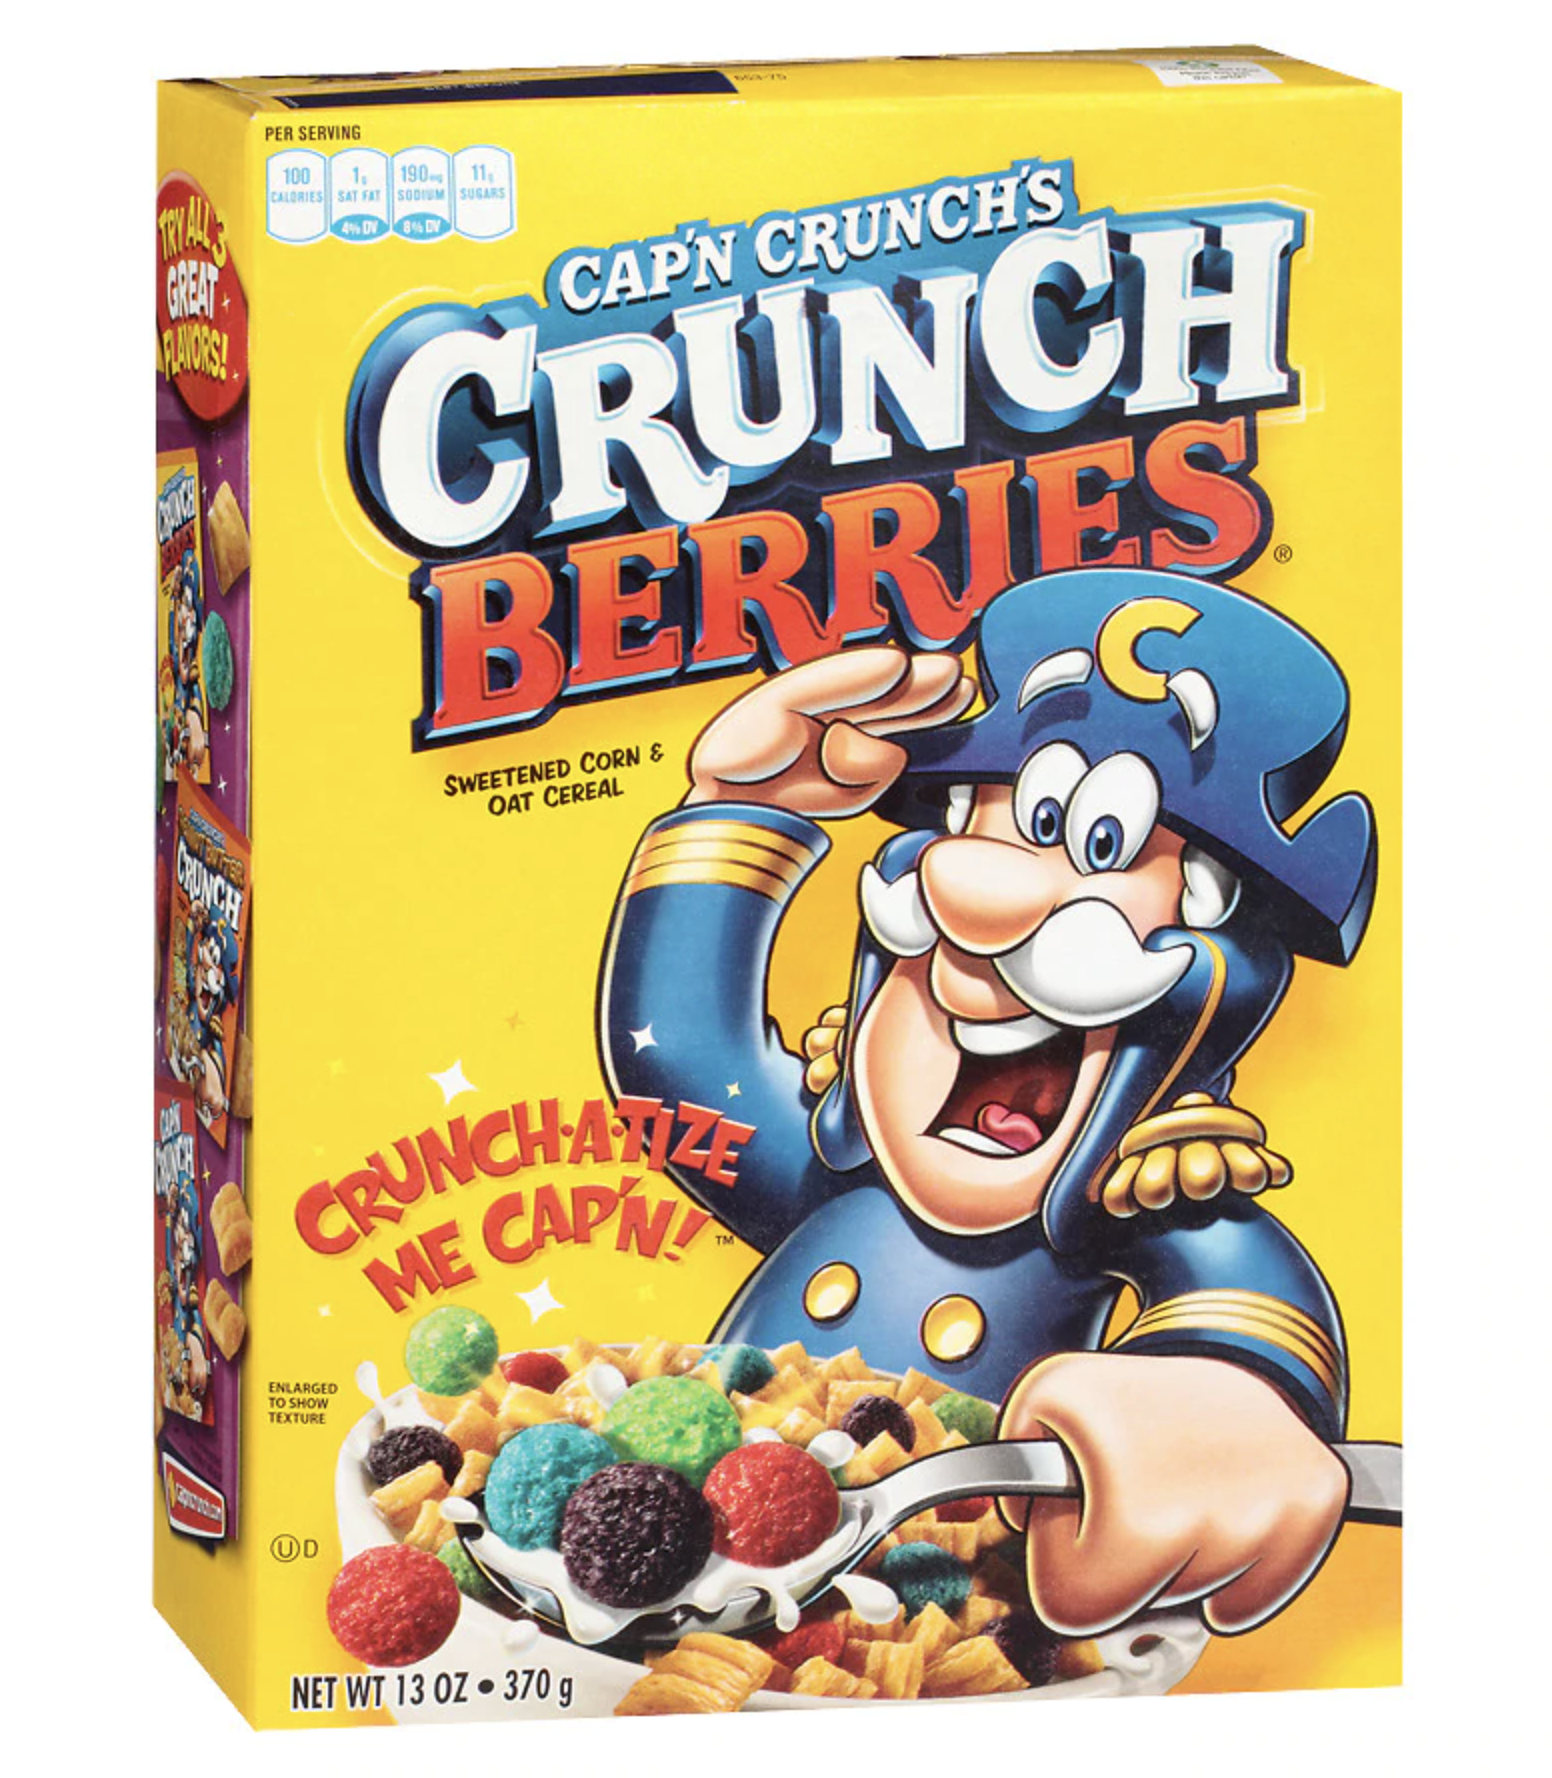 Captain Crunch (with Crunchberries!)